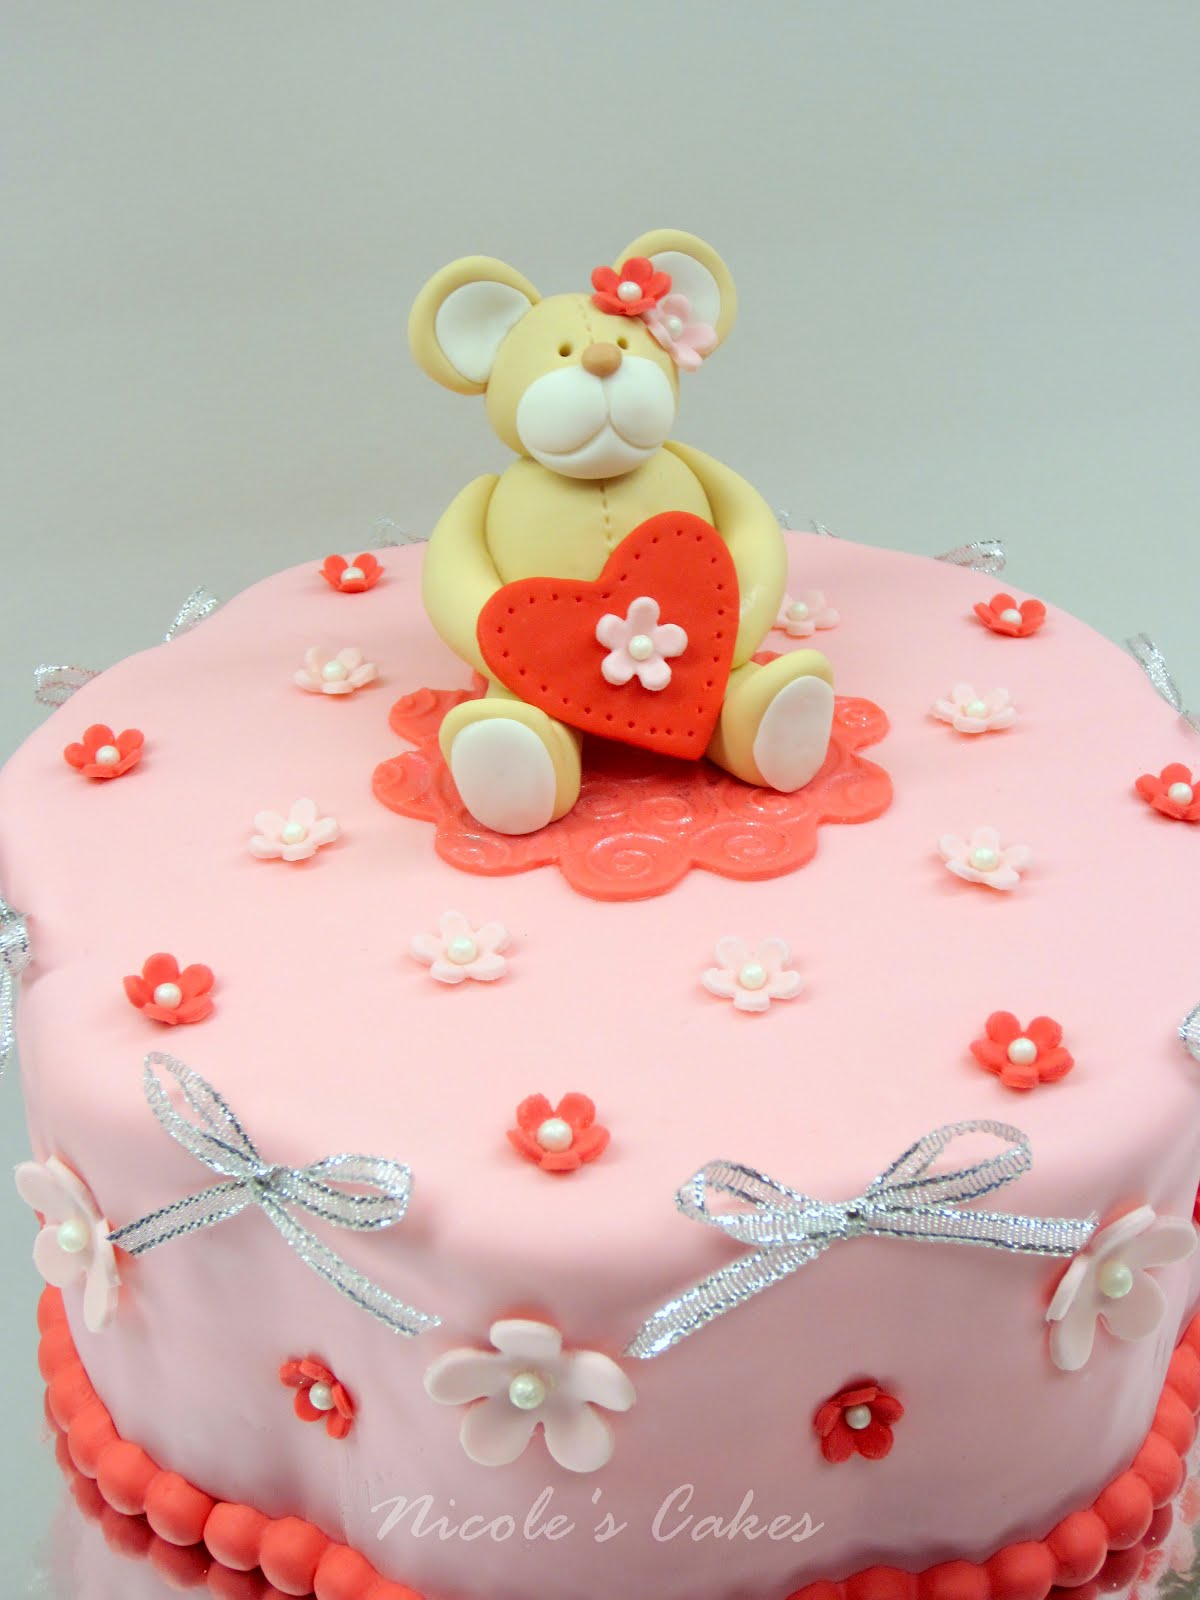 Confections, Cakes & Creations!: A Valentine's Birthday Cake